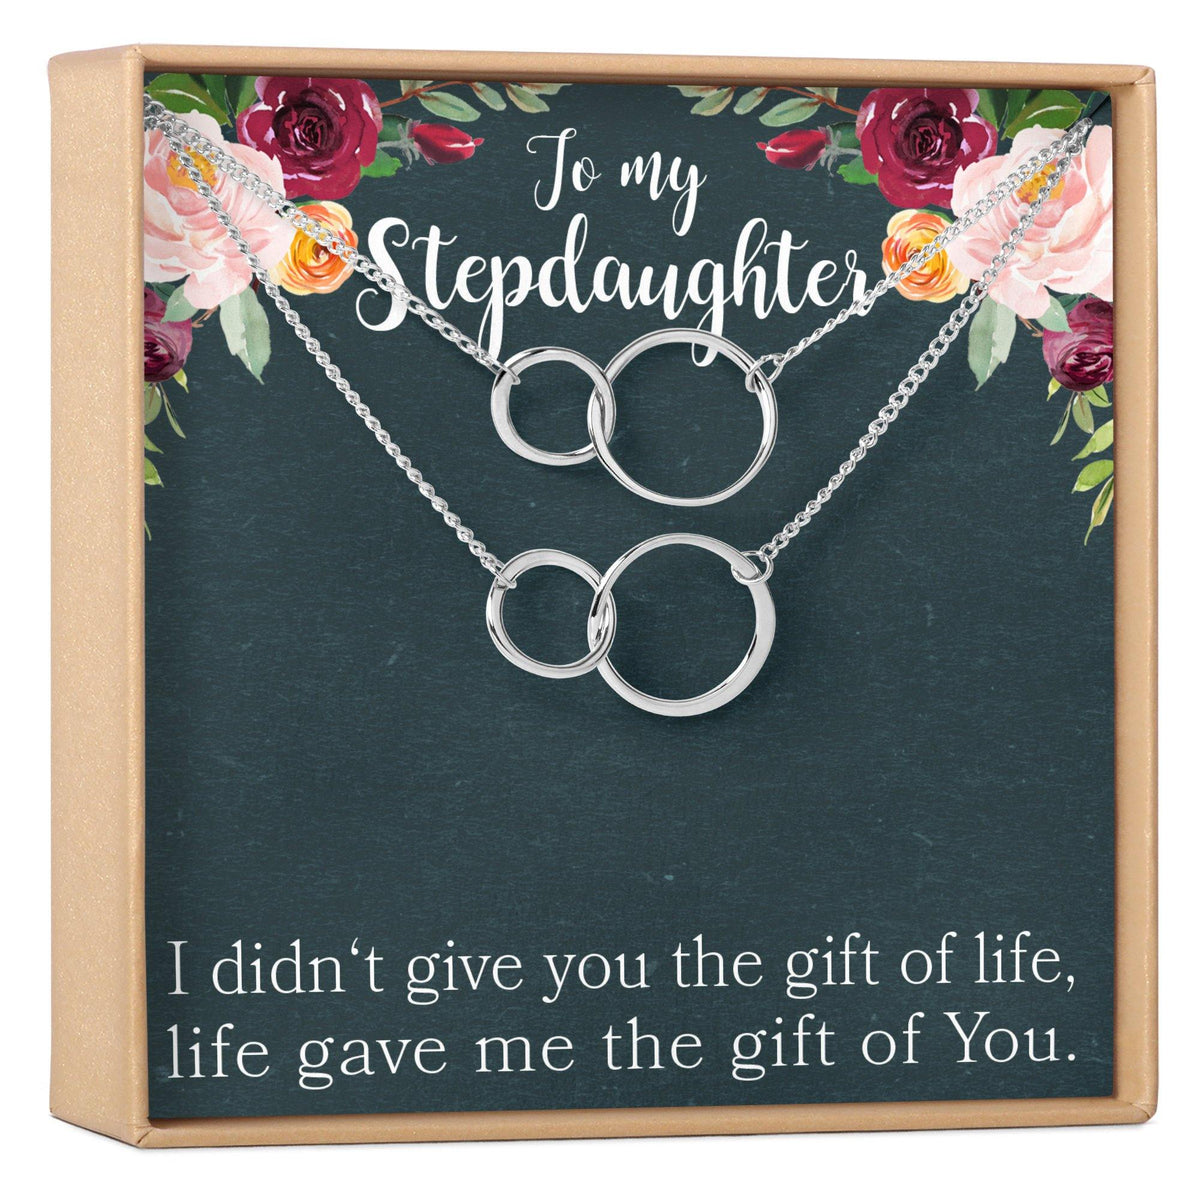 Stepdaughter Necklace, Multiple Styles - Dear Ava, Jewelry / Necklaces / Pendants